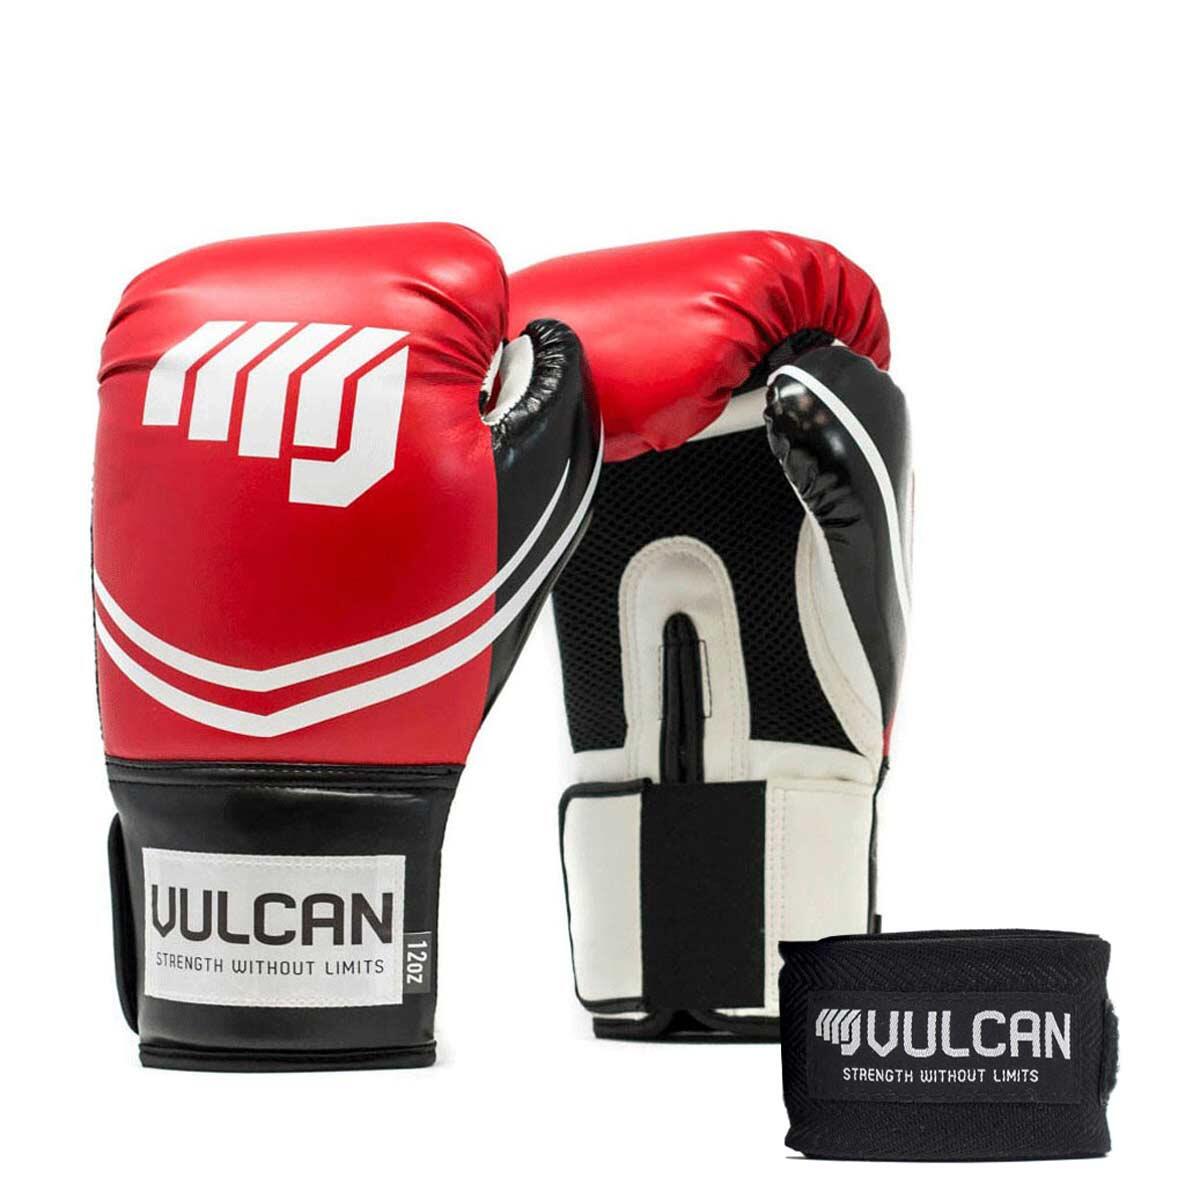 VULCAN BOXING GLOVES 14oz RED/BLACK WITH HANDWRAPS 1/7